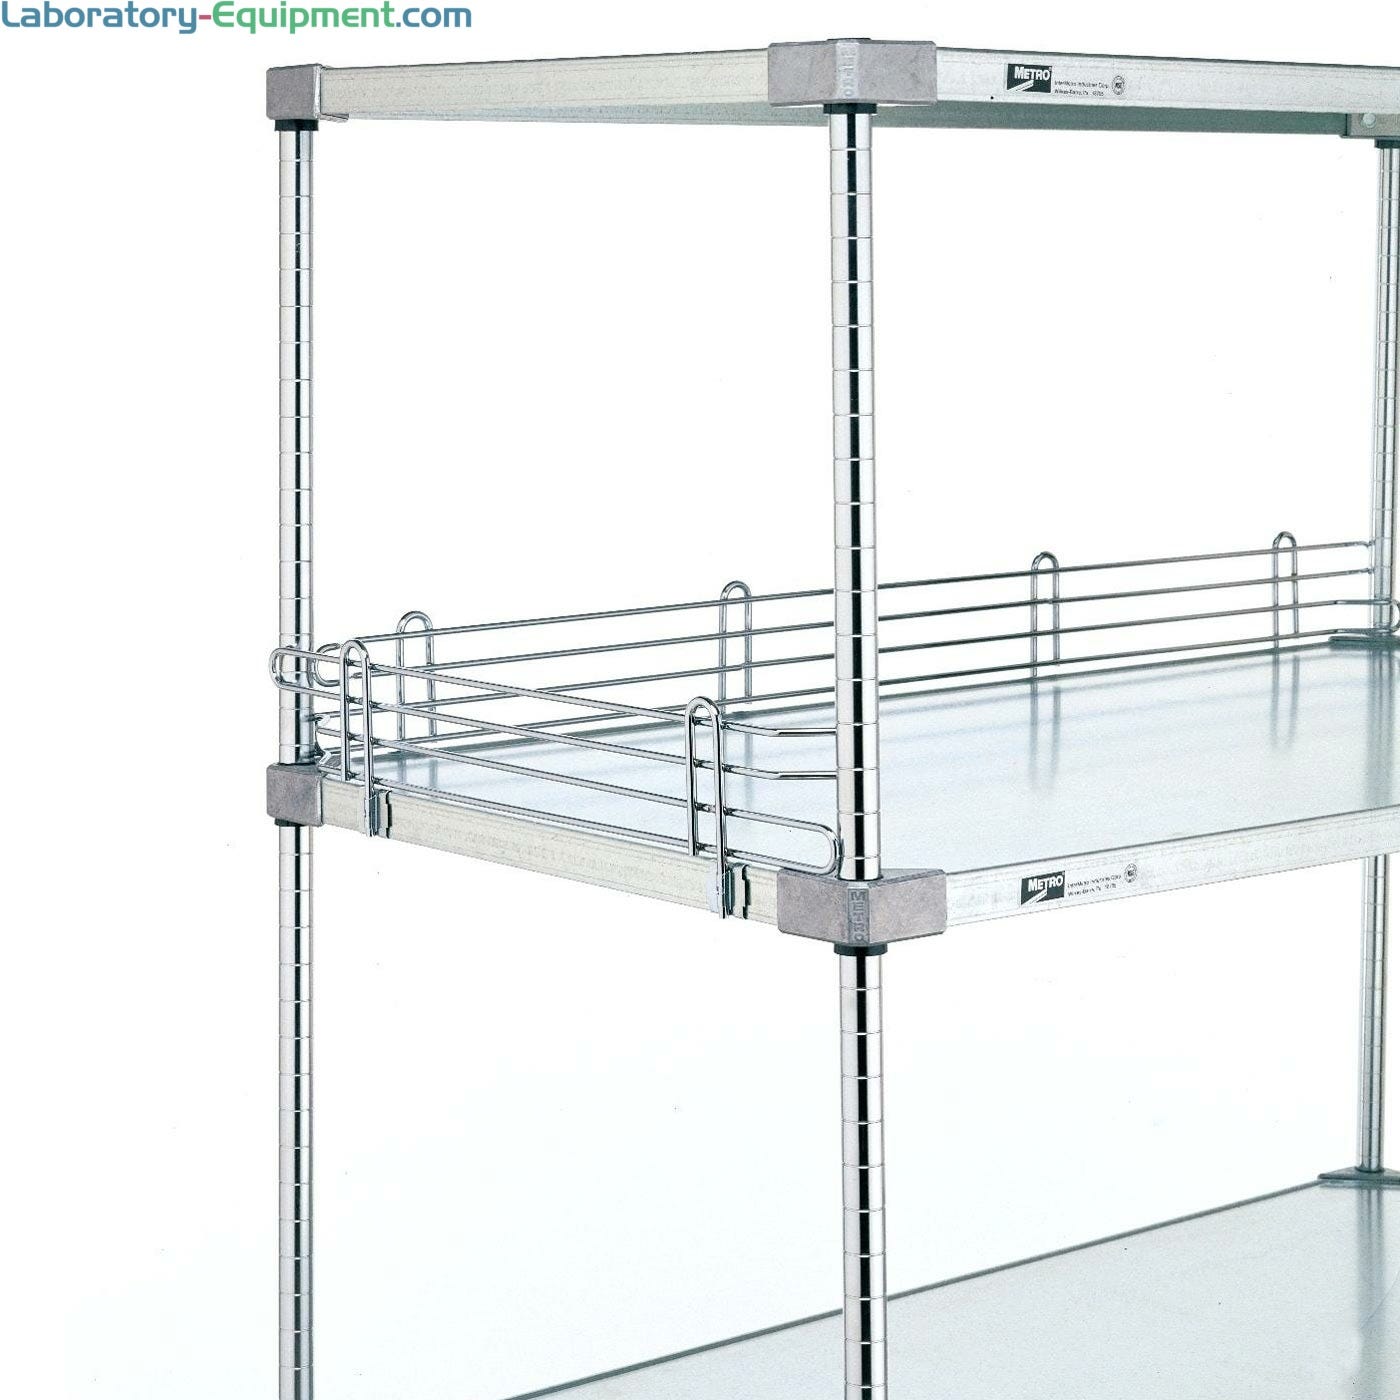 Metro MW208 MW Series Utility Cart with 3 Stainless Steel Solid Shelves, 24 x 36 x 39